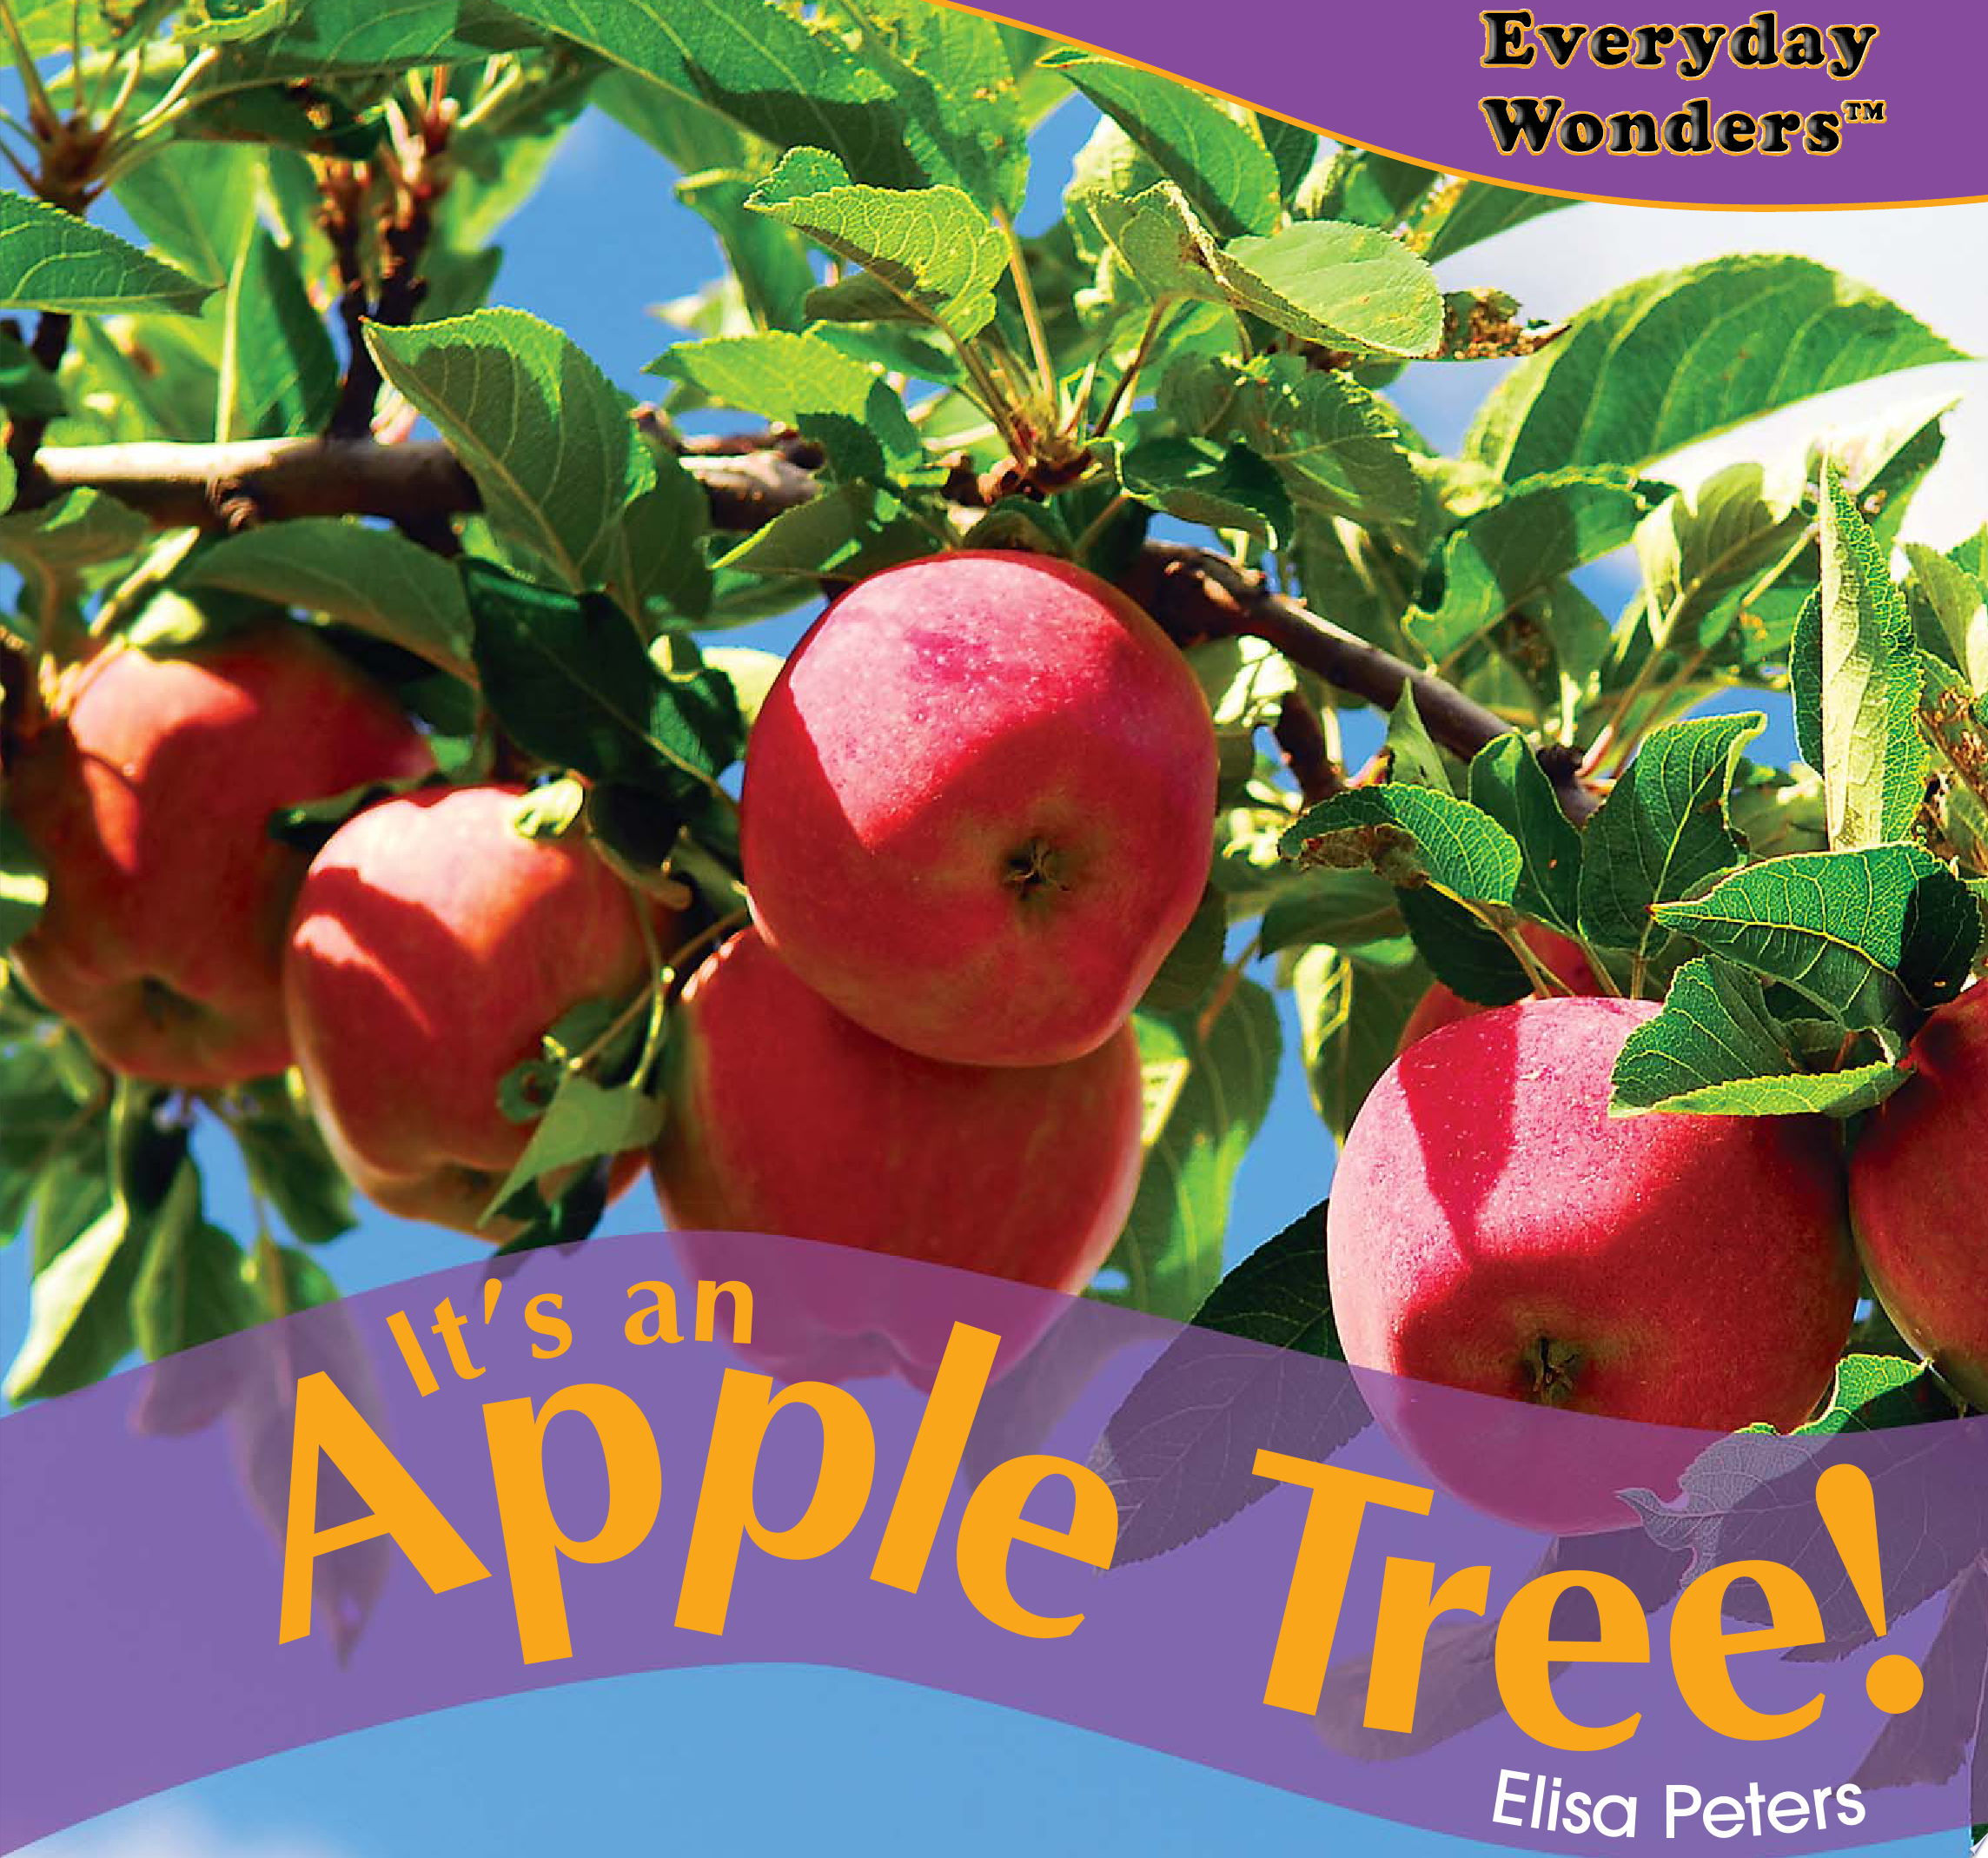 Image for "Its an Apple Tree!"